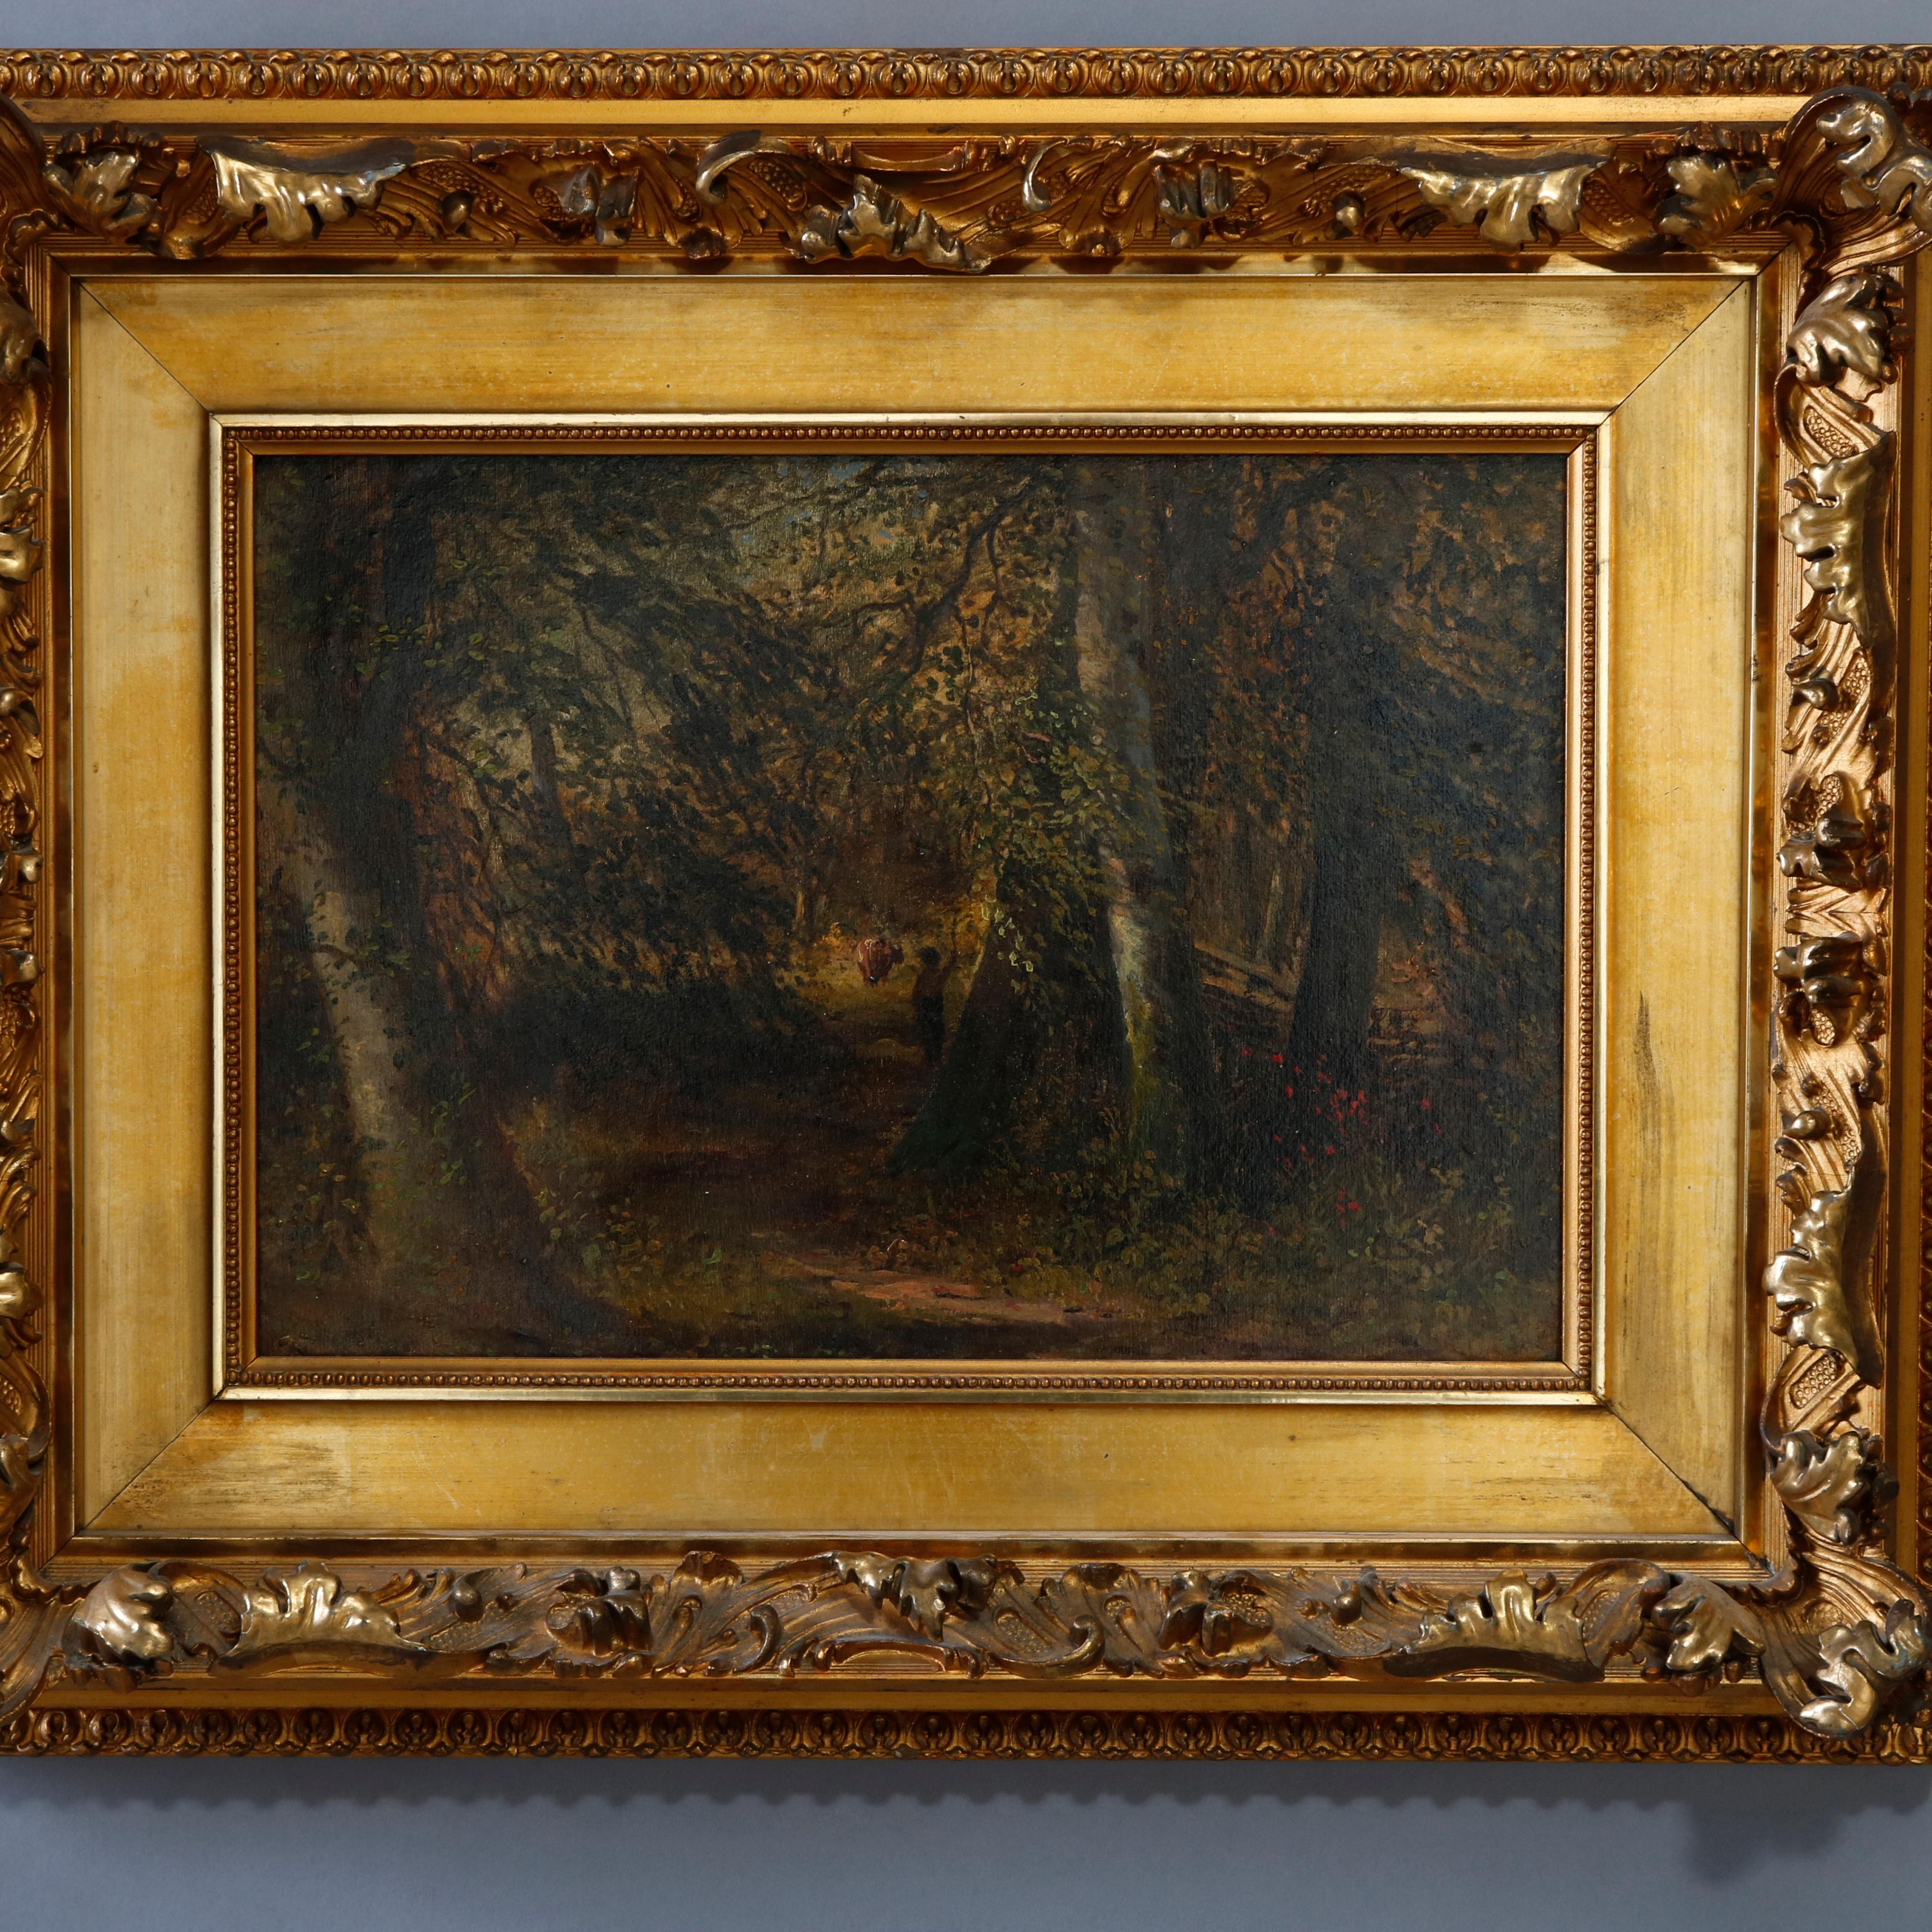 An antique oil on board painting of forest landscape with figures, seated in ornate giltwood frame, en verso signed T. M. Pomeroy, c1890.

Measures: 17